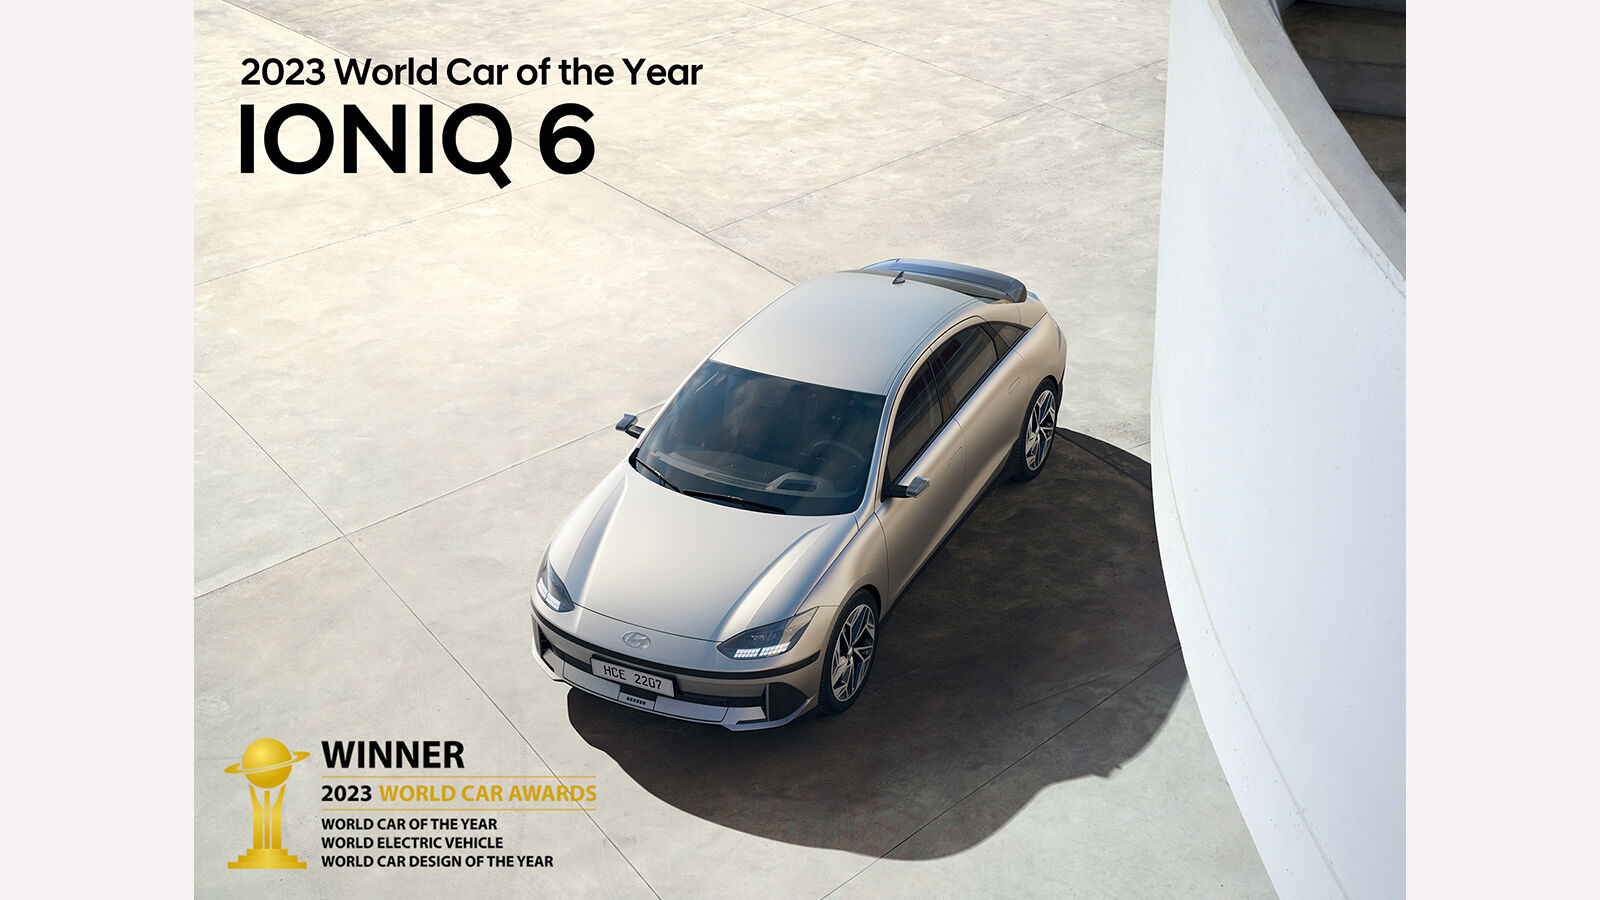 Hyundai IONIQ 6 as World Car of the Year, World Electric Vehicle and World Car Design of the Year (2023)